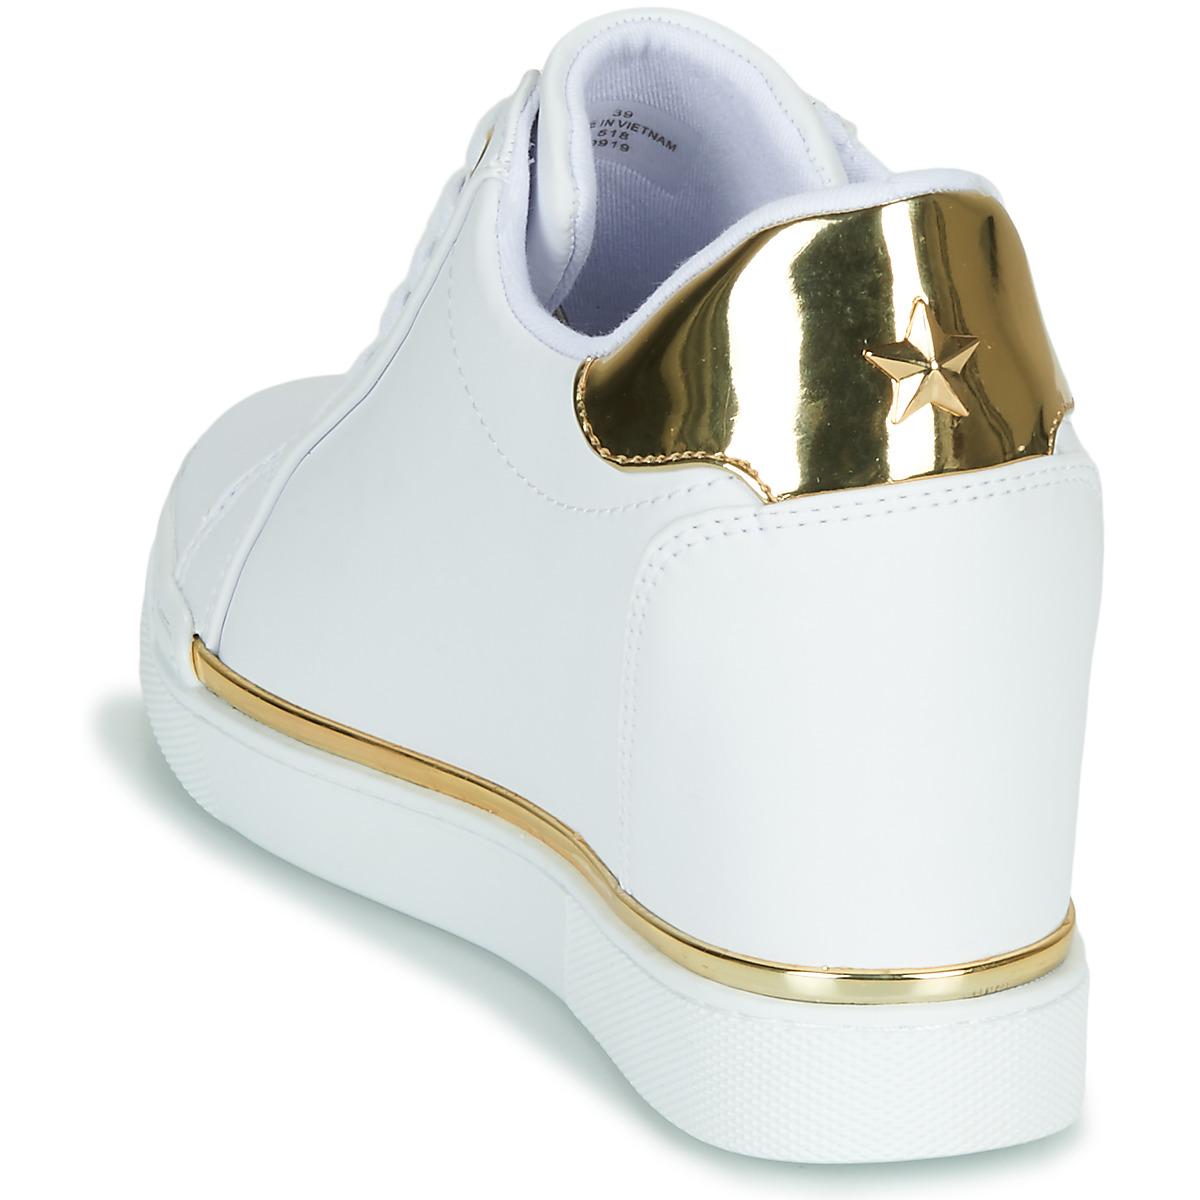 guess white and gold shoes